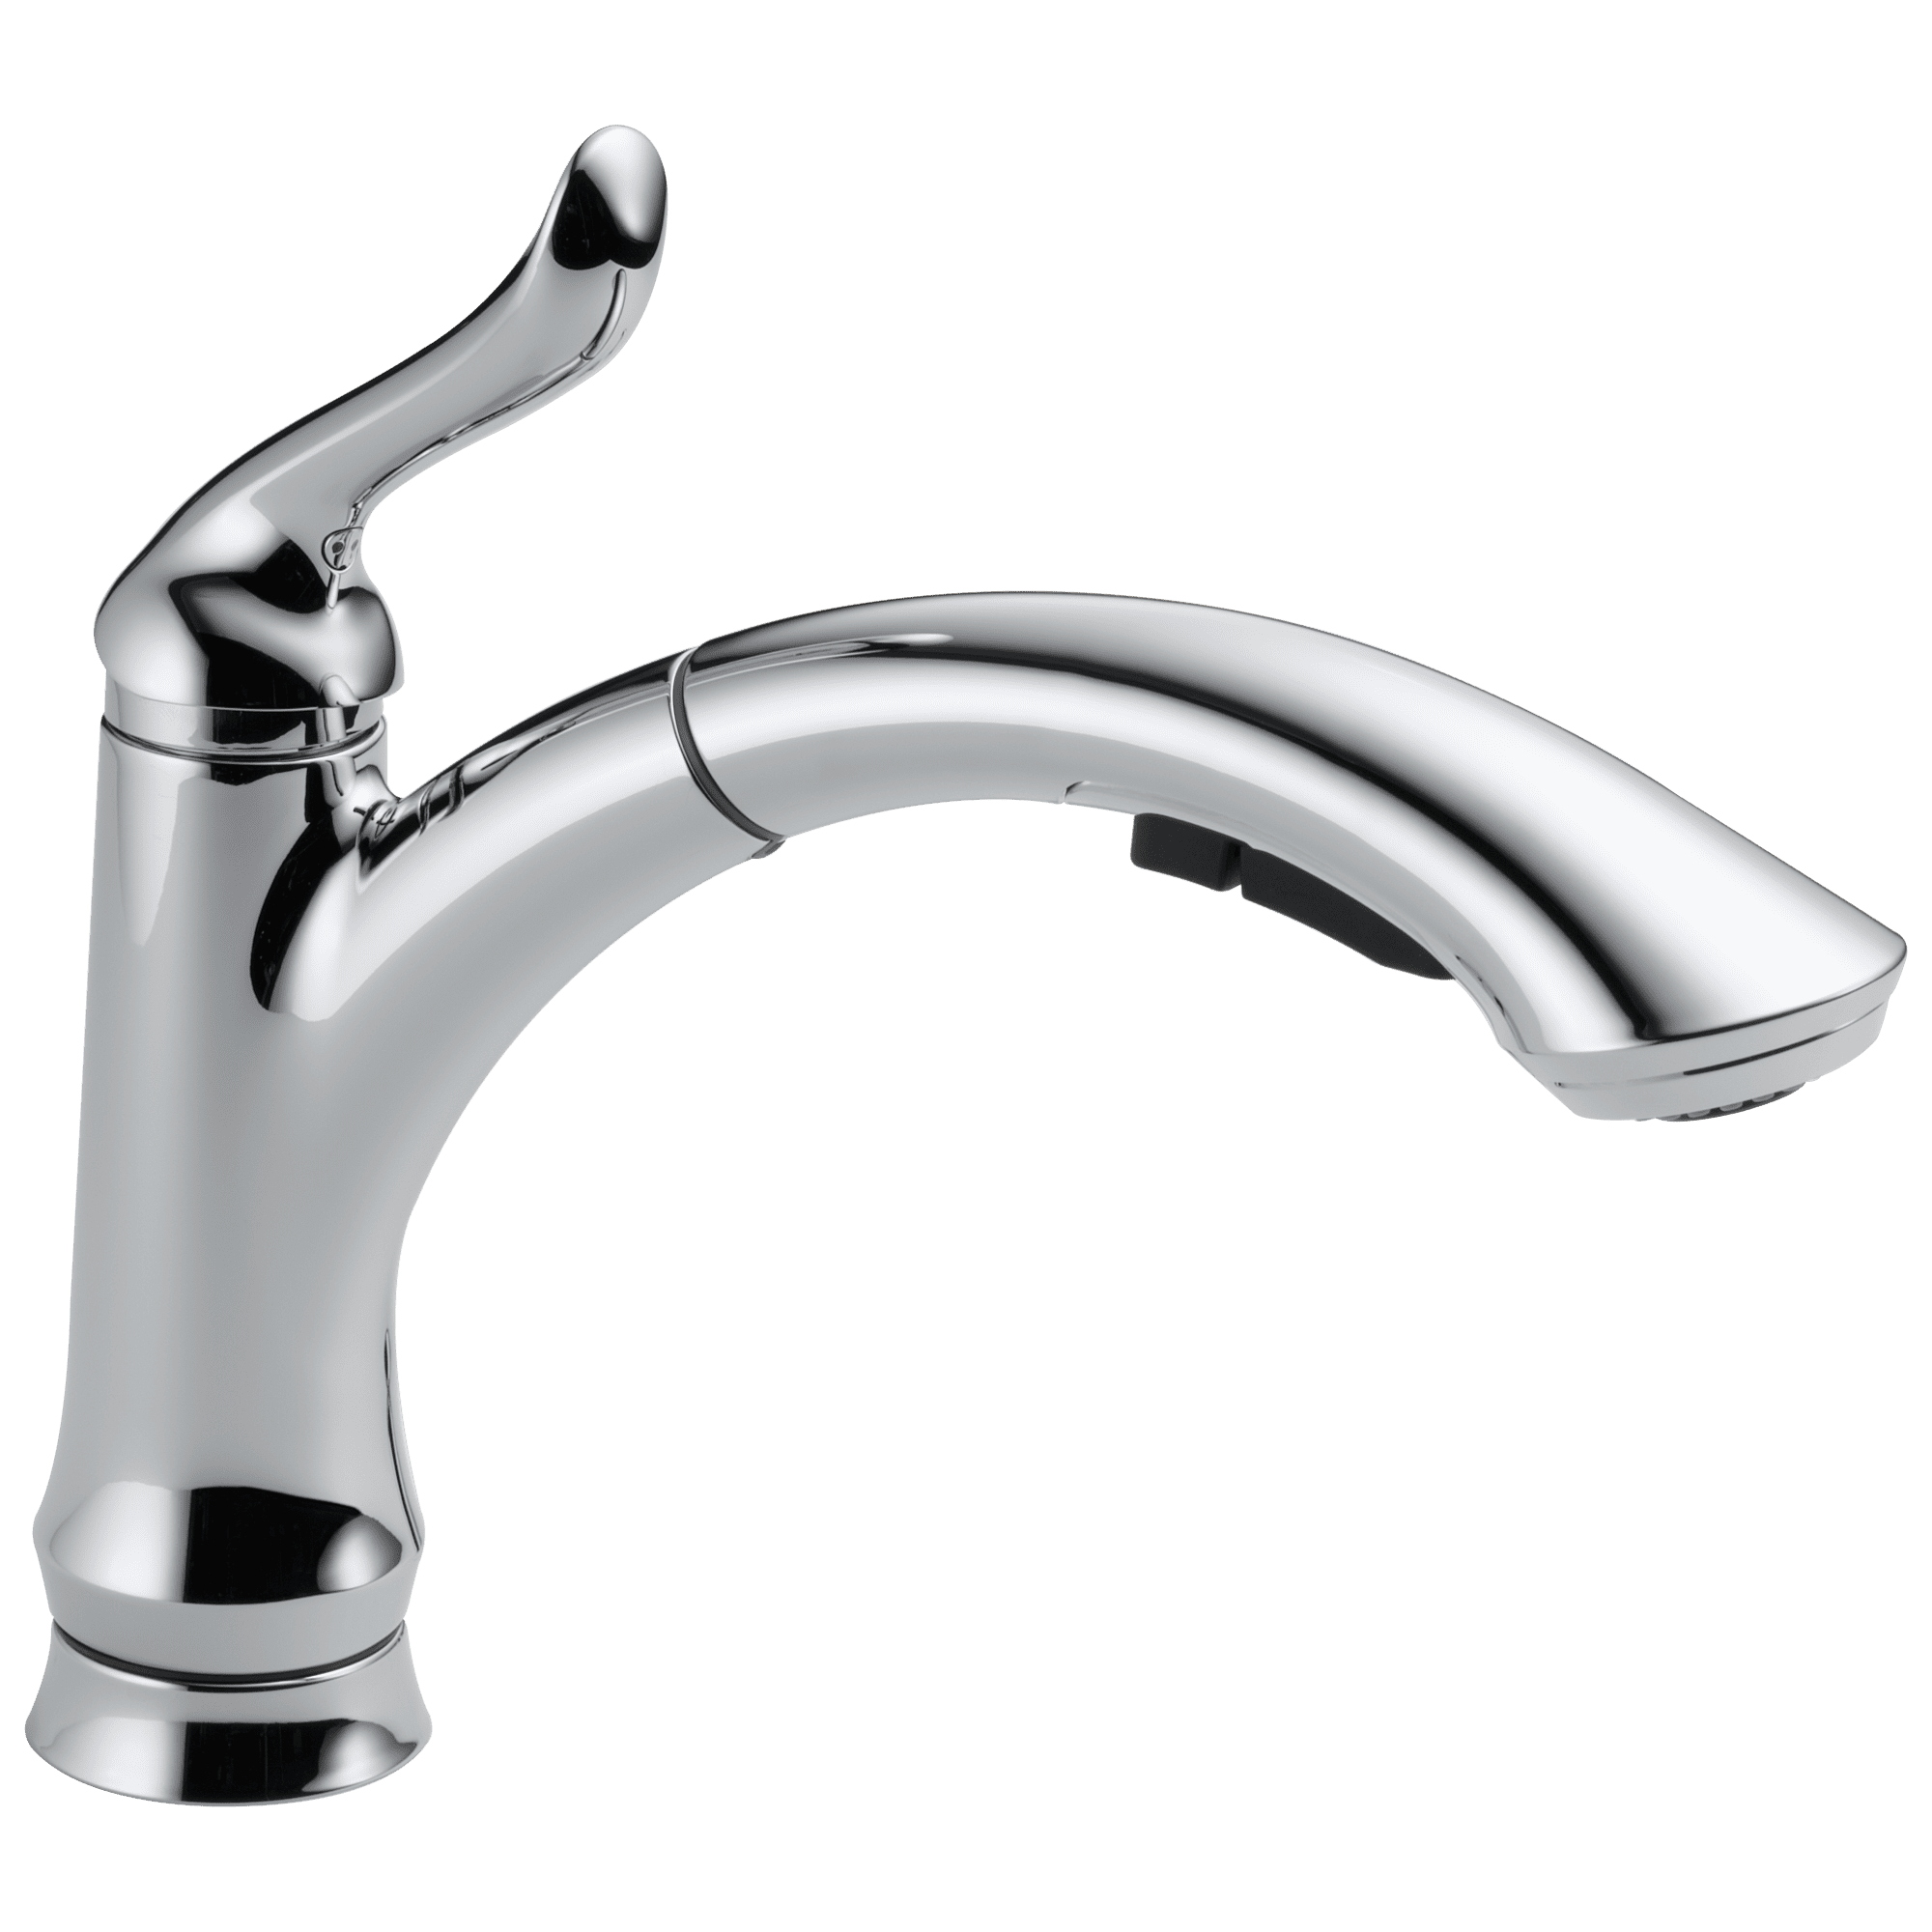 linden-single-handle-pull-out-kitchen-faucet-in-chrome-4353-dst